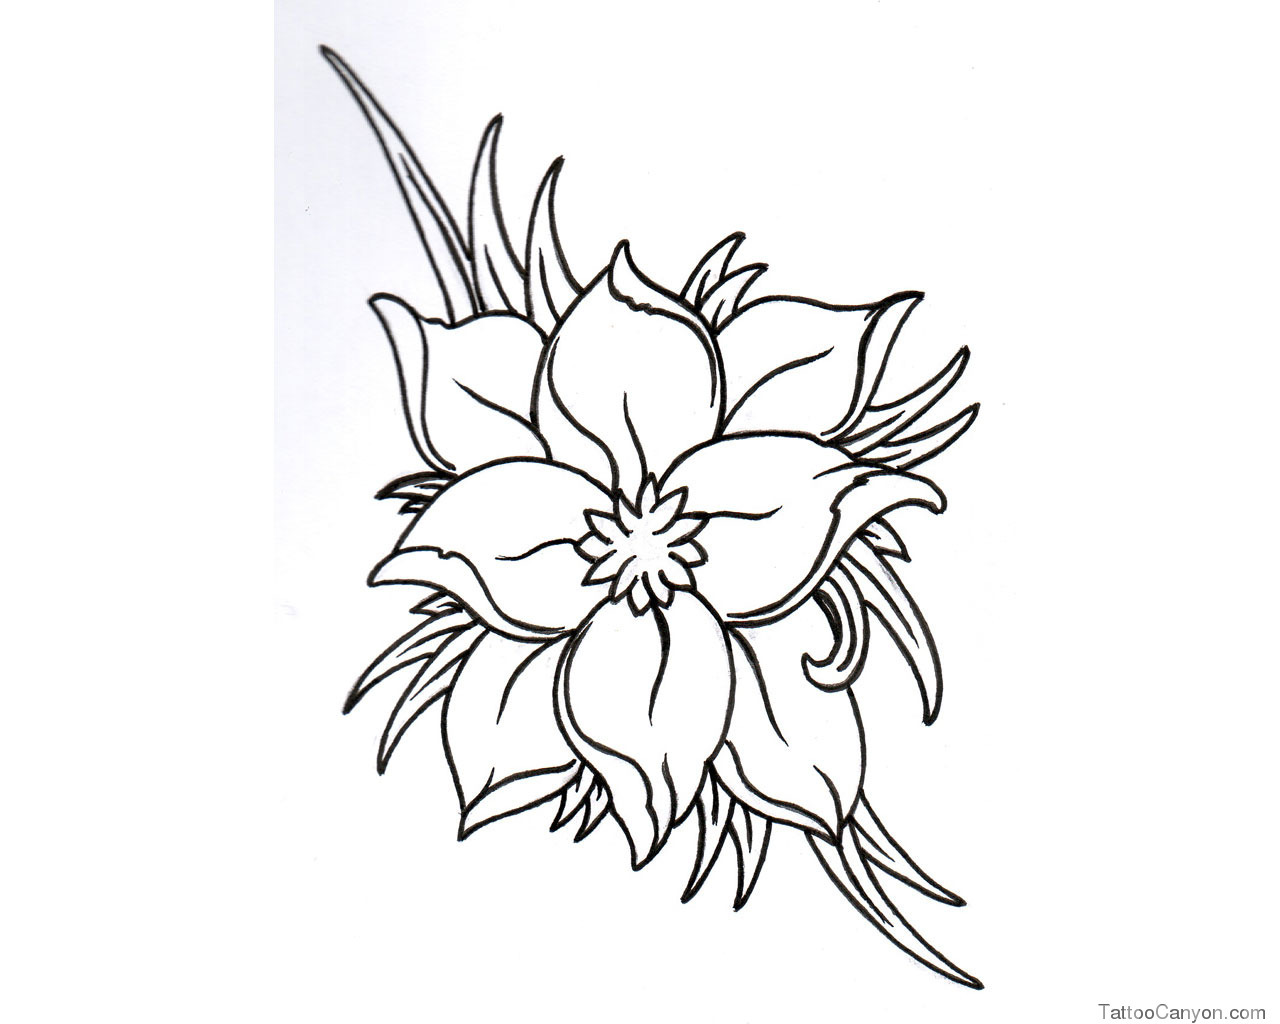 Black And White Flower Tattoos Designs Images  Pictures - Becuo